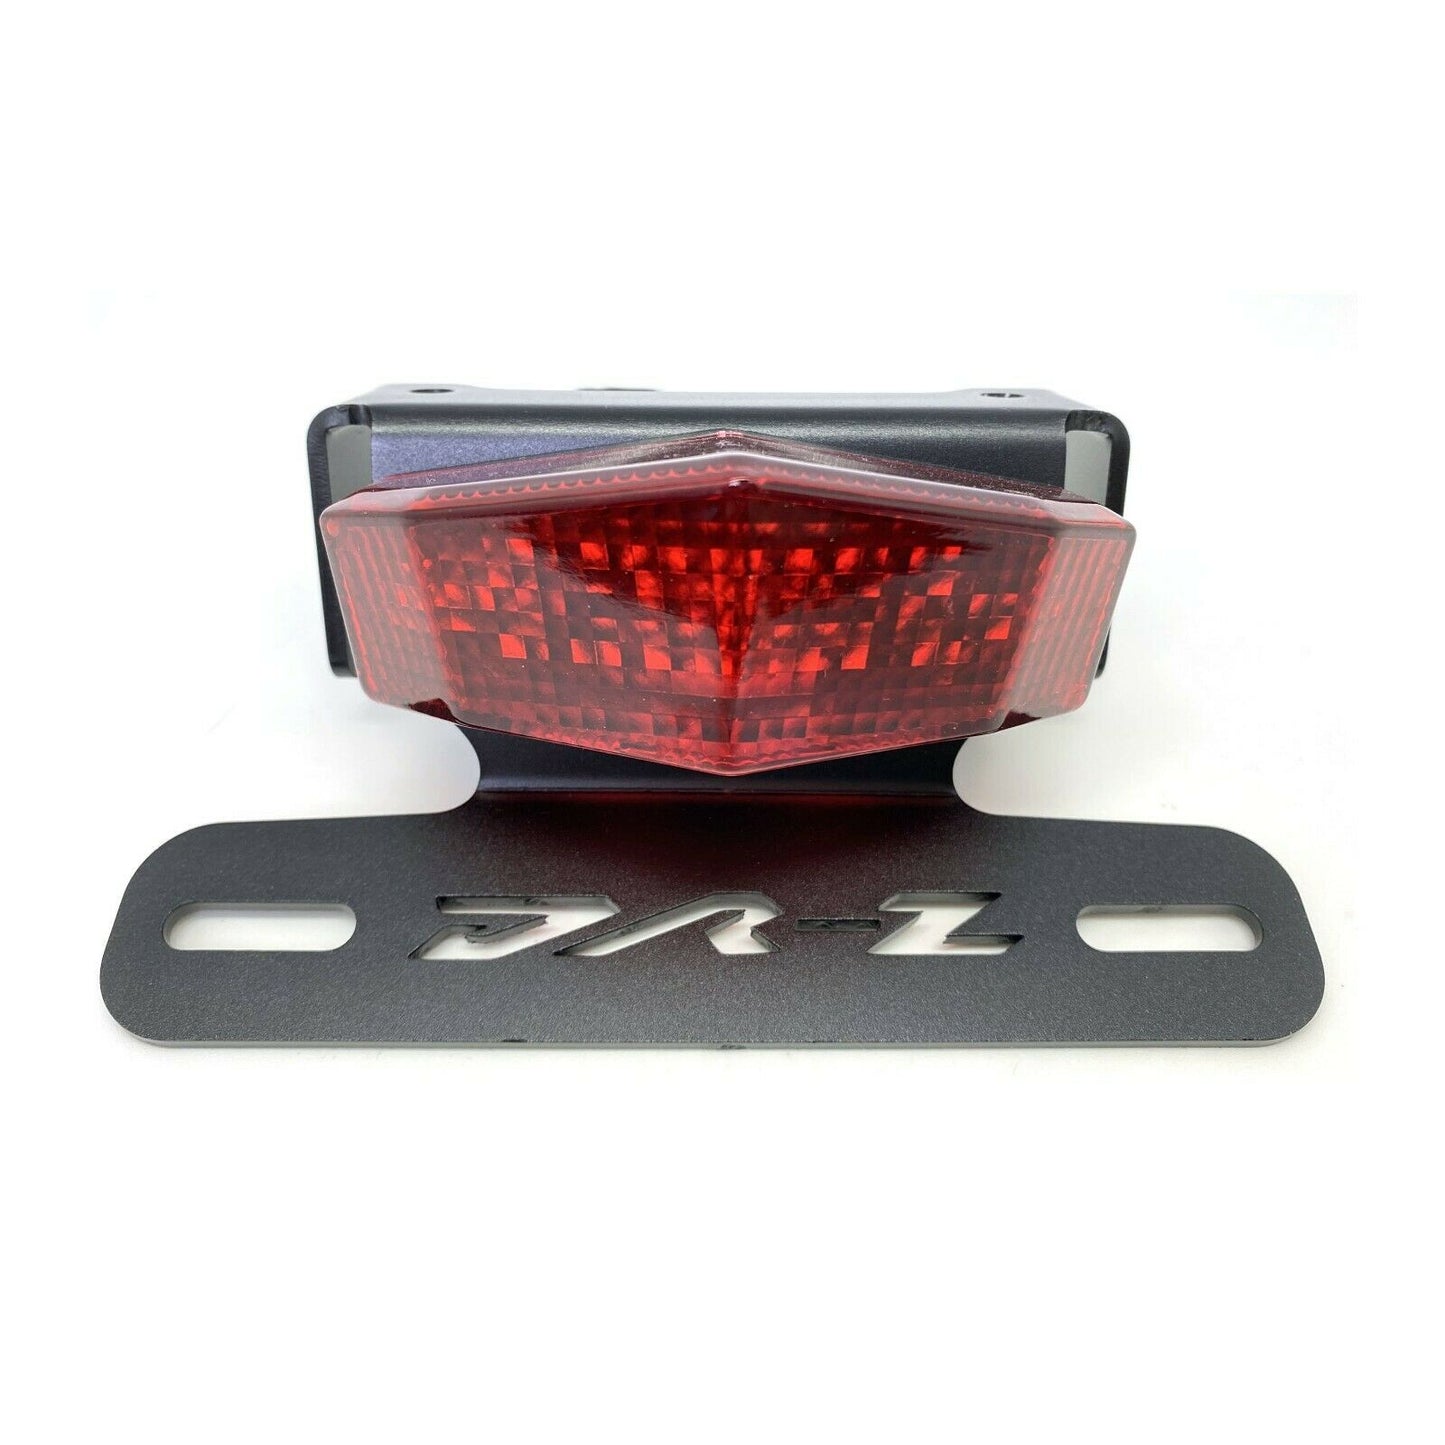 Motorcycle rear LED turn signal-tail lights for Suzuki DRZ 400S-E-M 2000-20